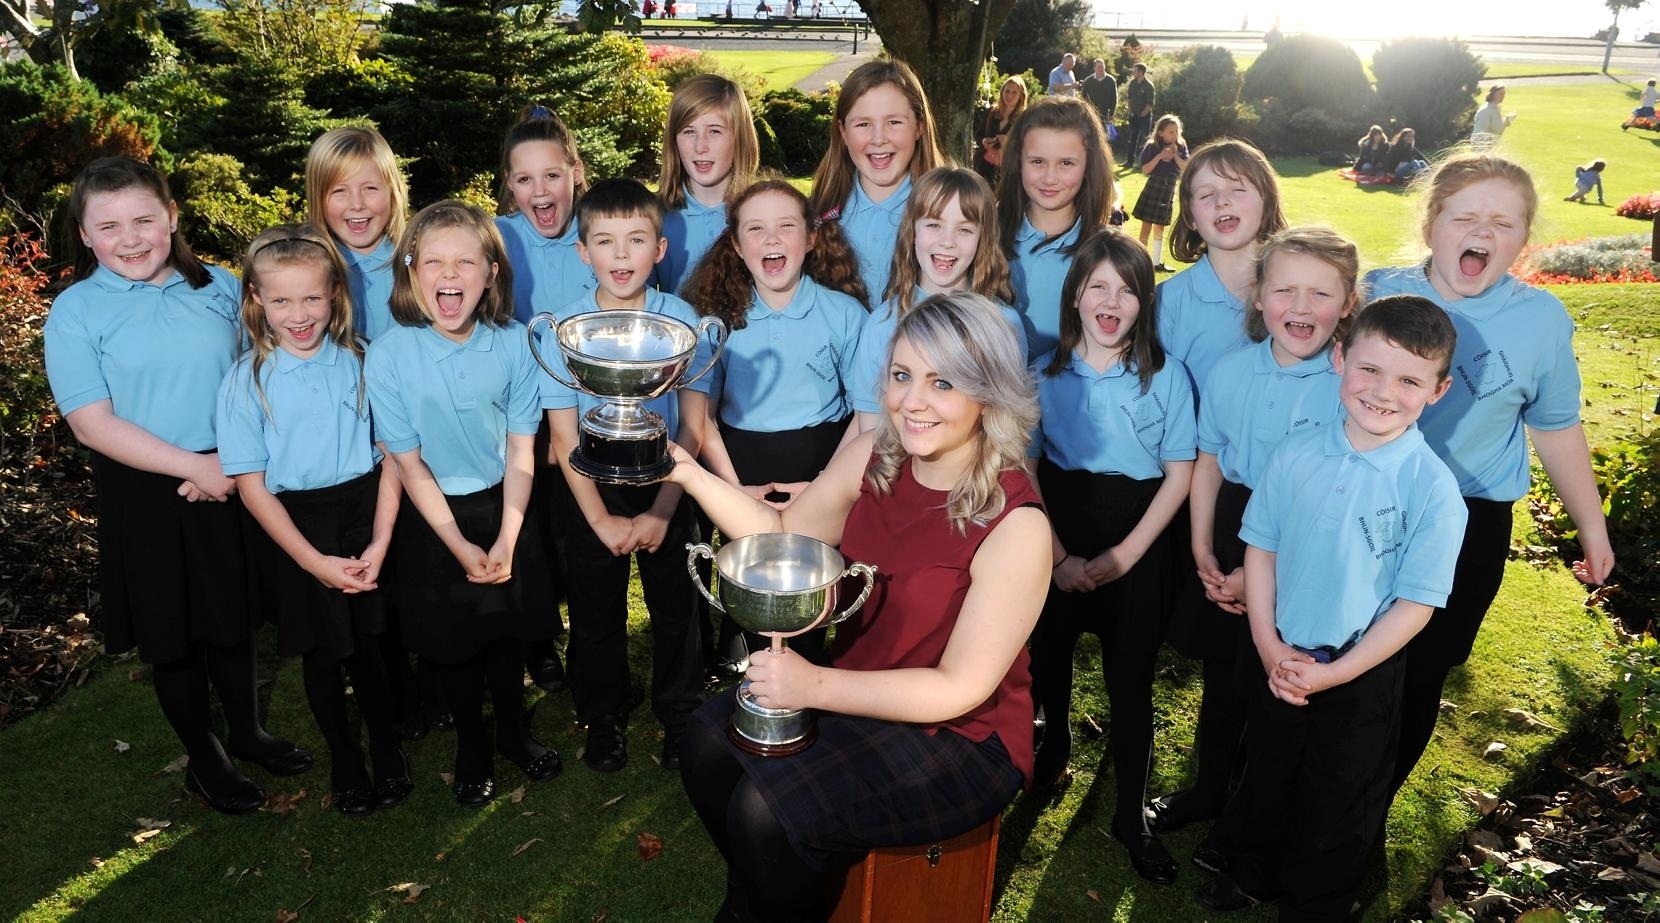 Picture by SANDY McCOOK   12th October '15 Royal National Mod, Oban 2015  Clare Jordan, conductor of the Bowmore Primary School Gaelic Choir, Islay with the Olive Campbell MBE Trophy and the Macintyre Trophy  won for Puirt-a-beul.